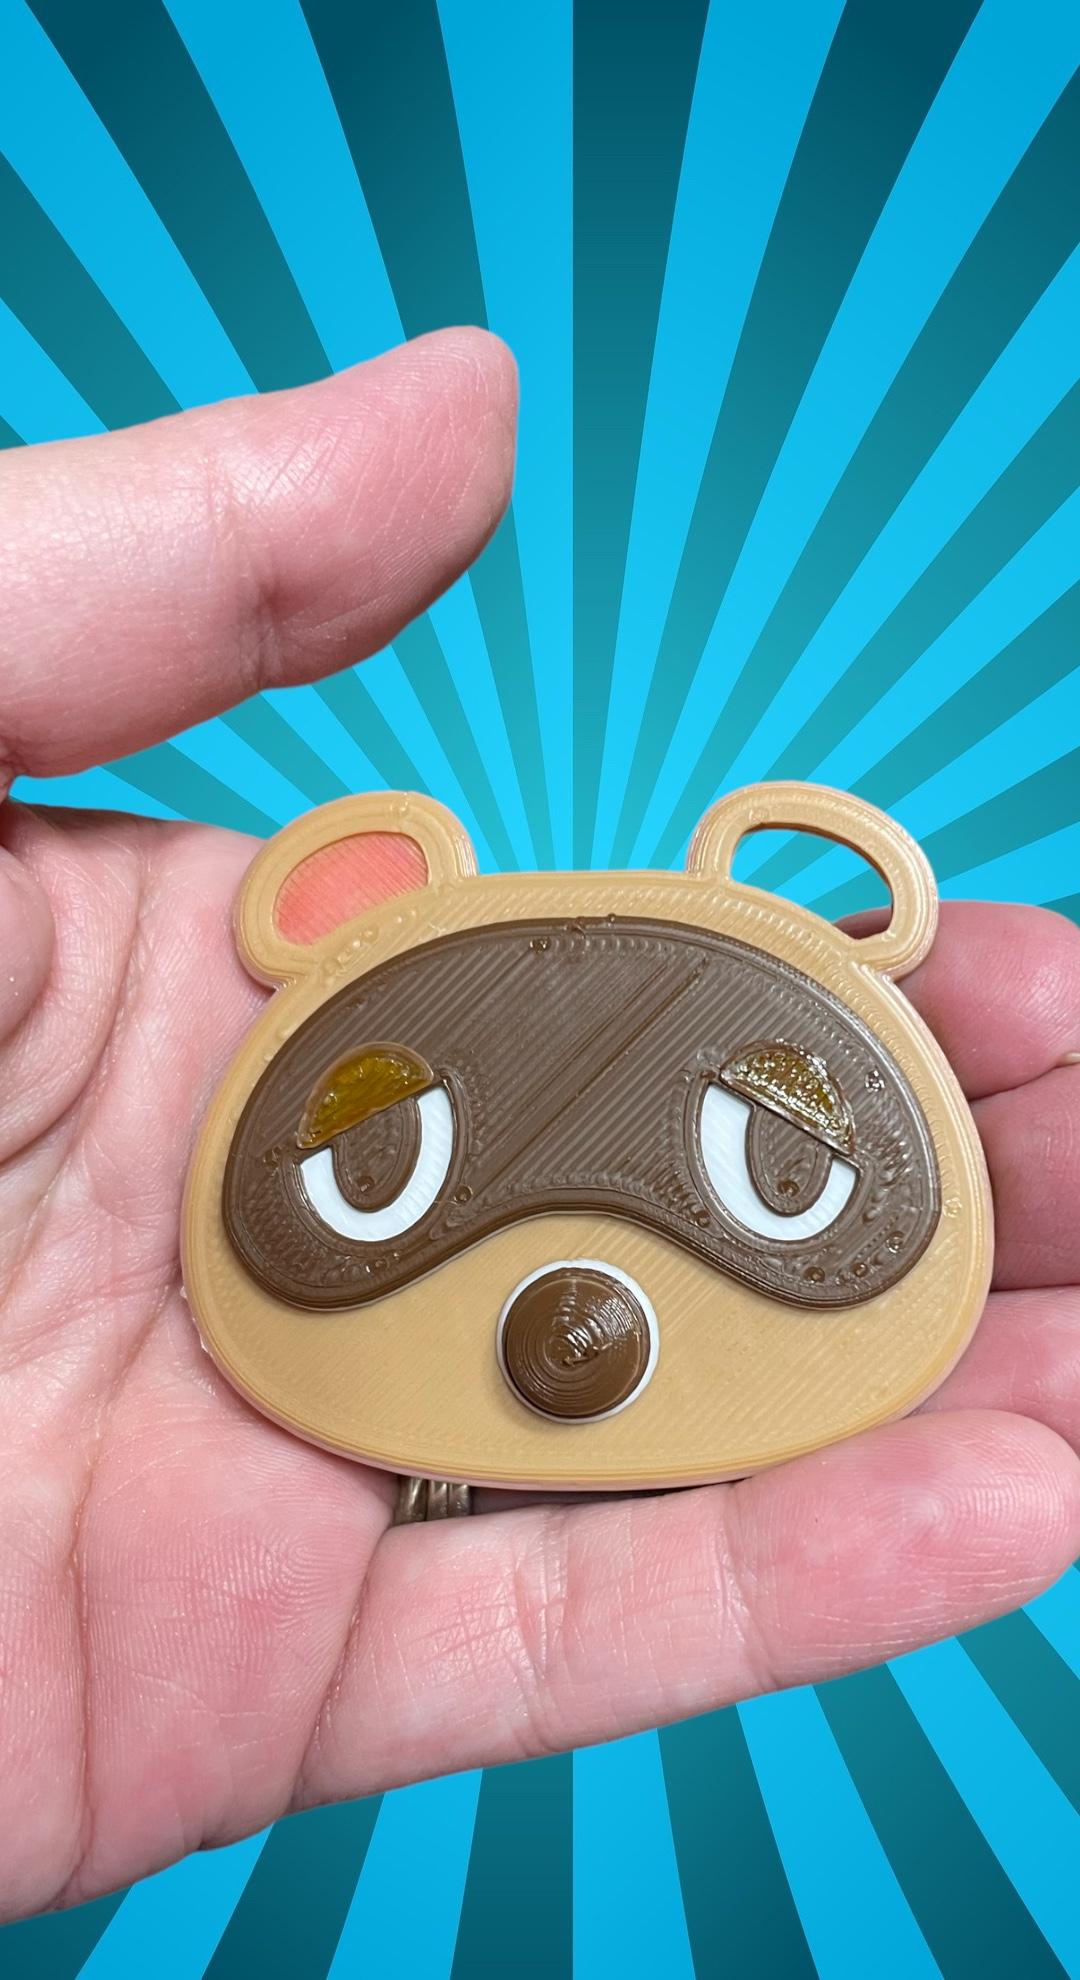 Animal Crossing Tom Nook Key Ring - I had fun swapping out the filaments to achieve as close of resemblance as possible. Shouldn’t have done this when I was tired, cuz I obviously had a bit of issue.

Thanks for sharing the file! I love it! I will definitely reprint him, and try to get my filament changes at the right level….when I am awake. - 3d model